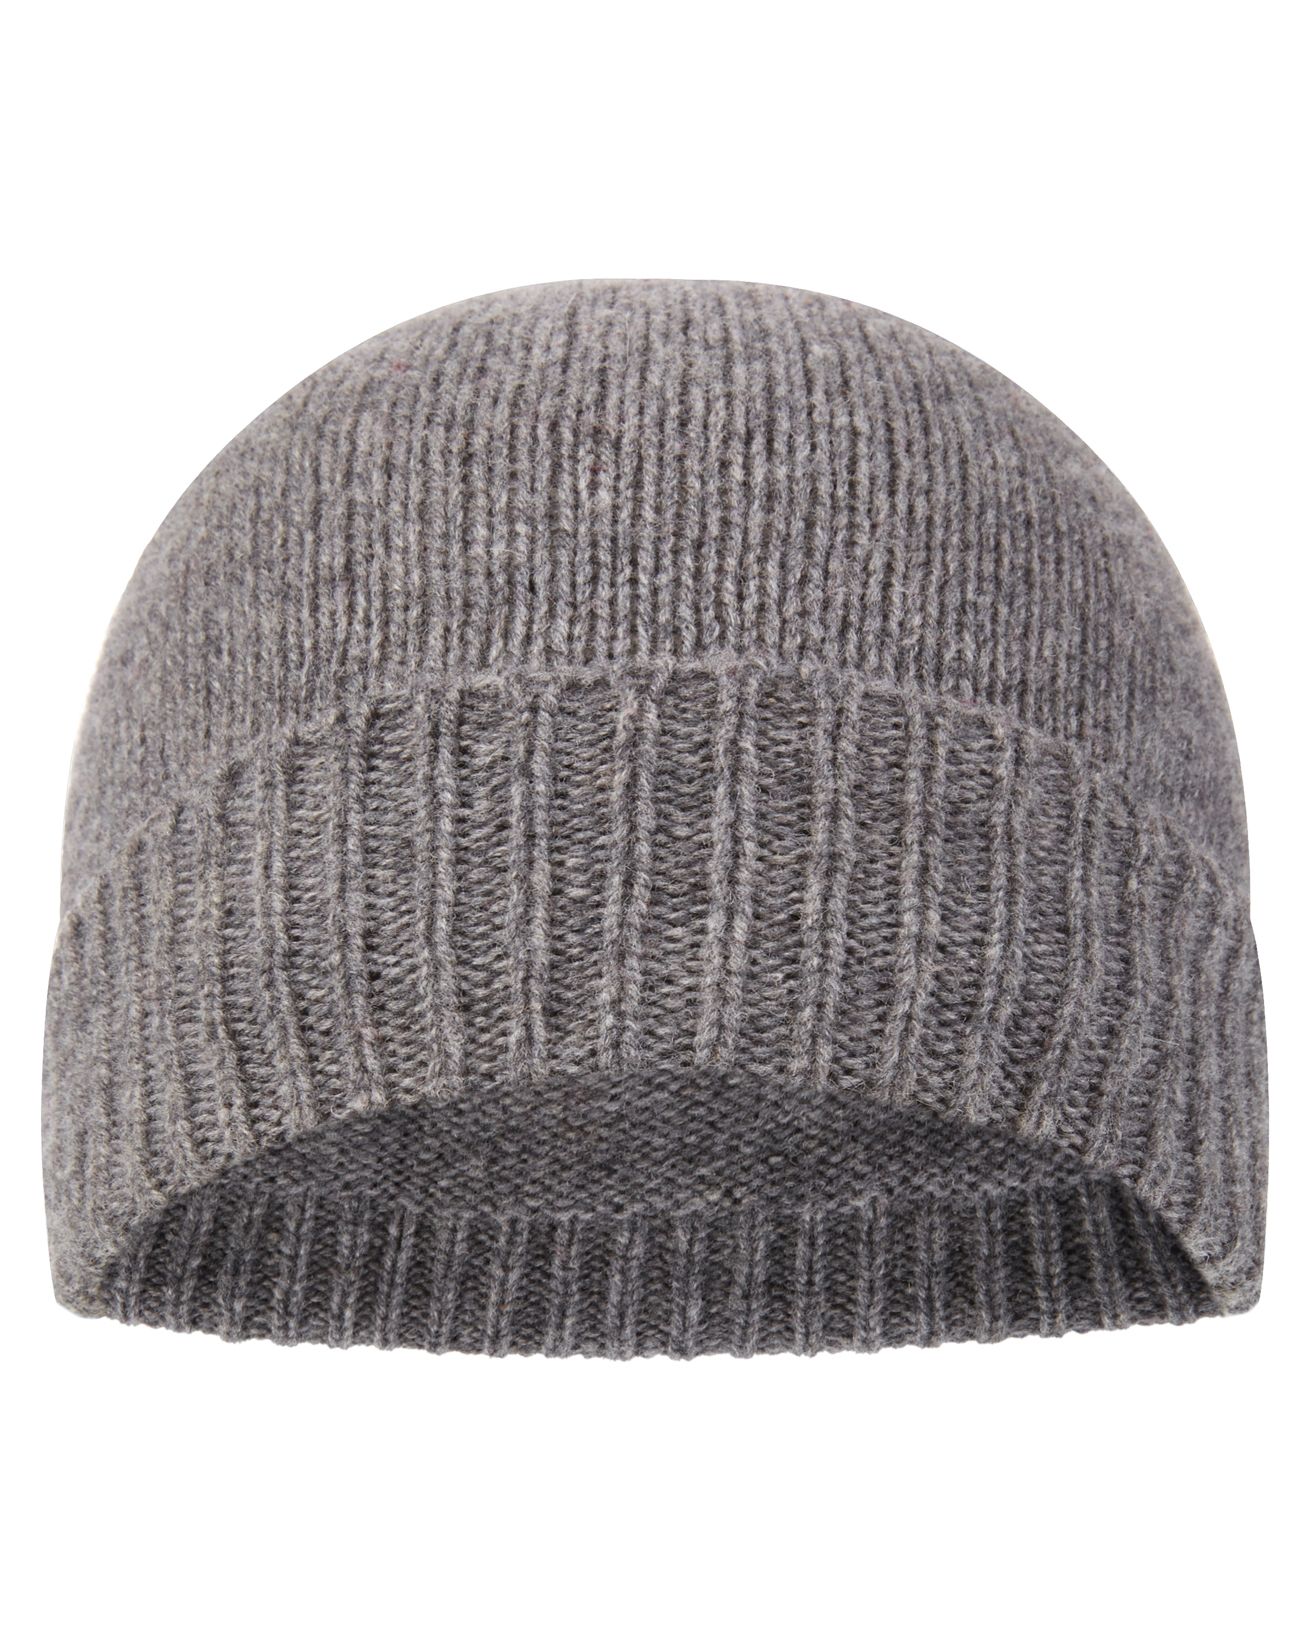 Men's Knitted Lambswool Hat